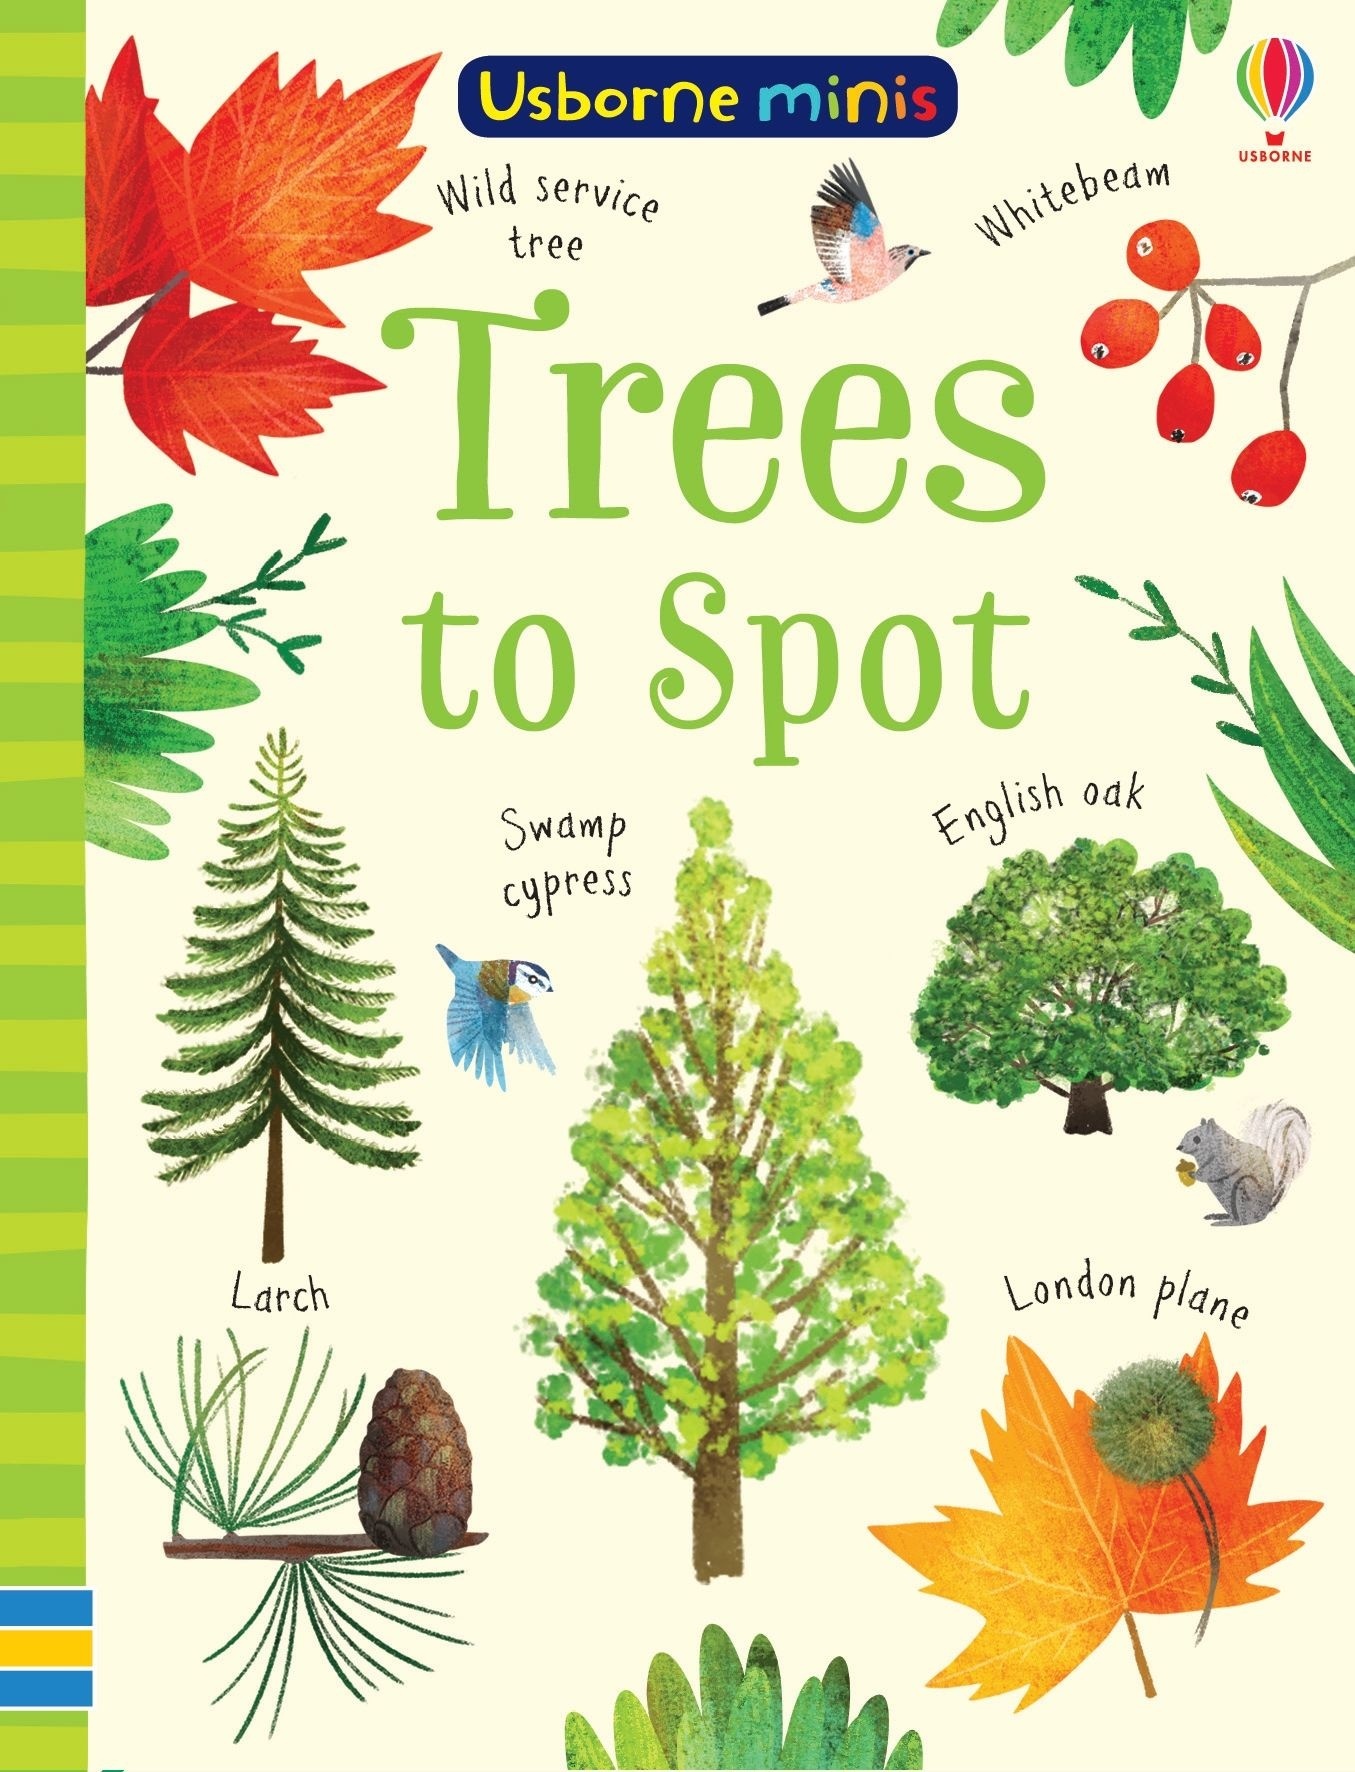 Trees to Spot